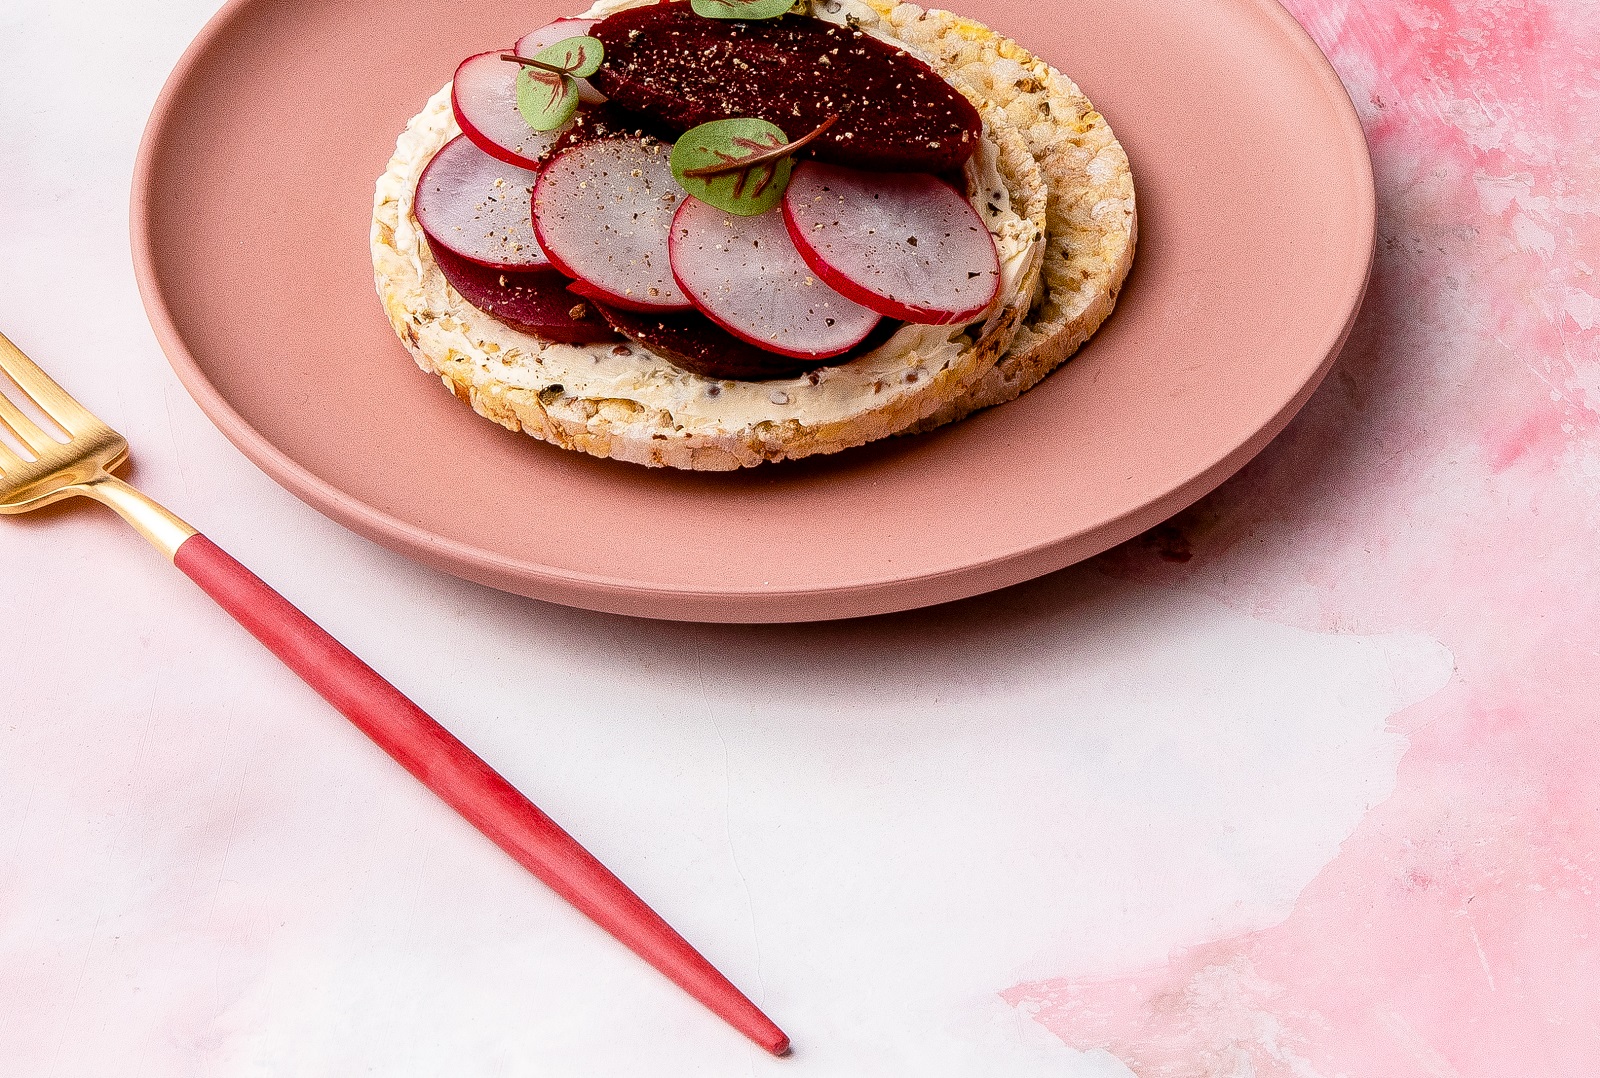 Cream Fraiche with Mustard/Mayo, Sliced Beetroot & Radish on CORN THINS slices for a quick tasty lunch